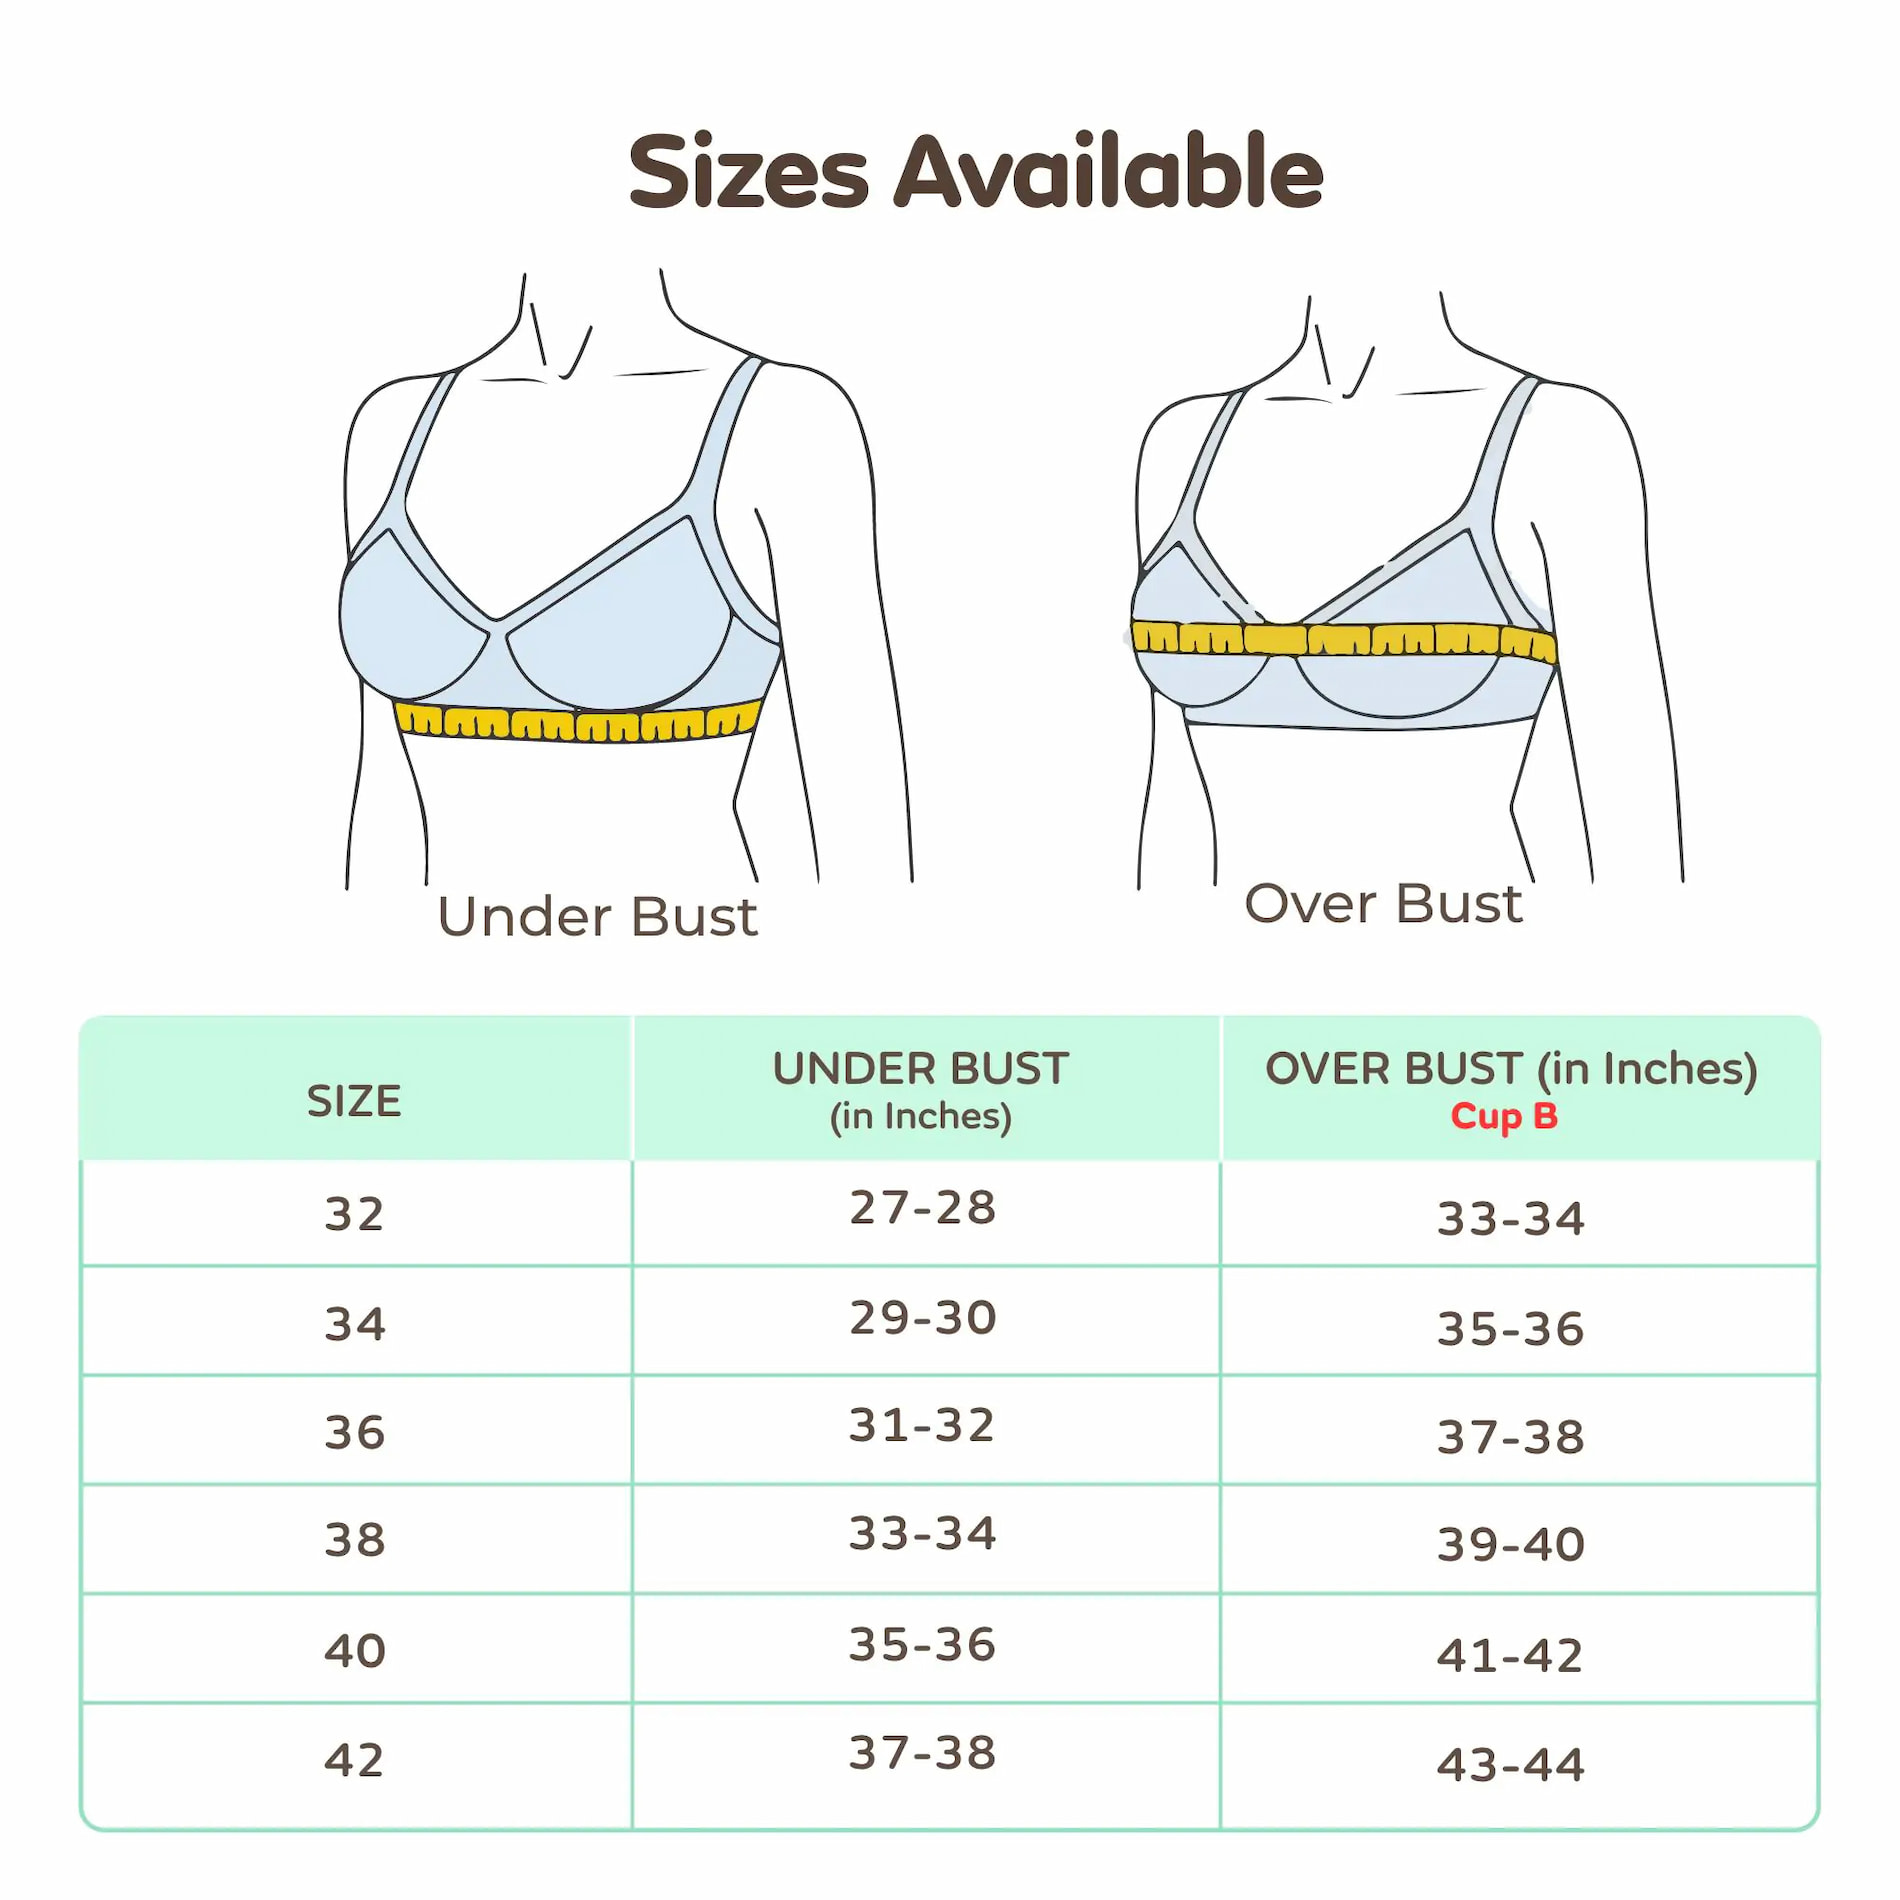 Mylo Maternity/Nursing Moulded Spacer Cup Bra with free bra extender -Navy  38 B 